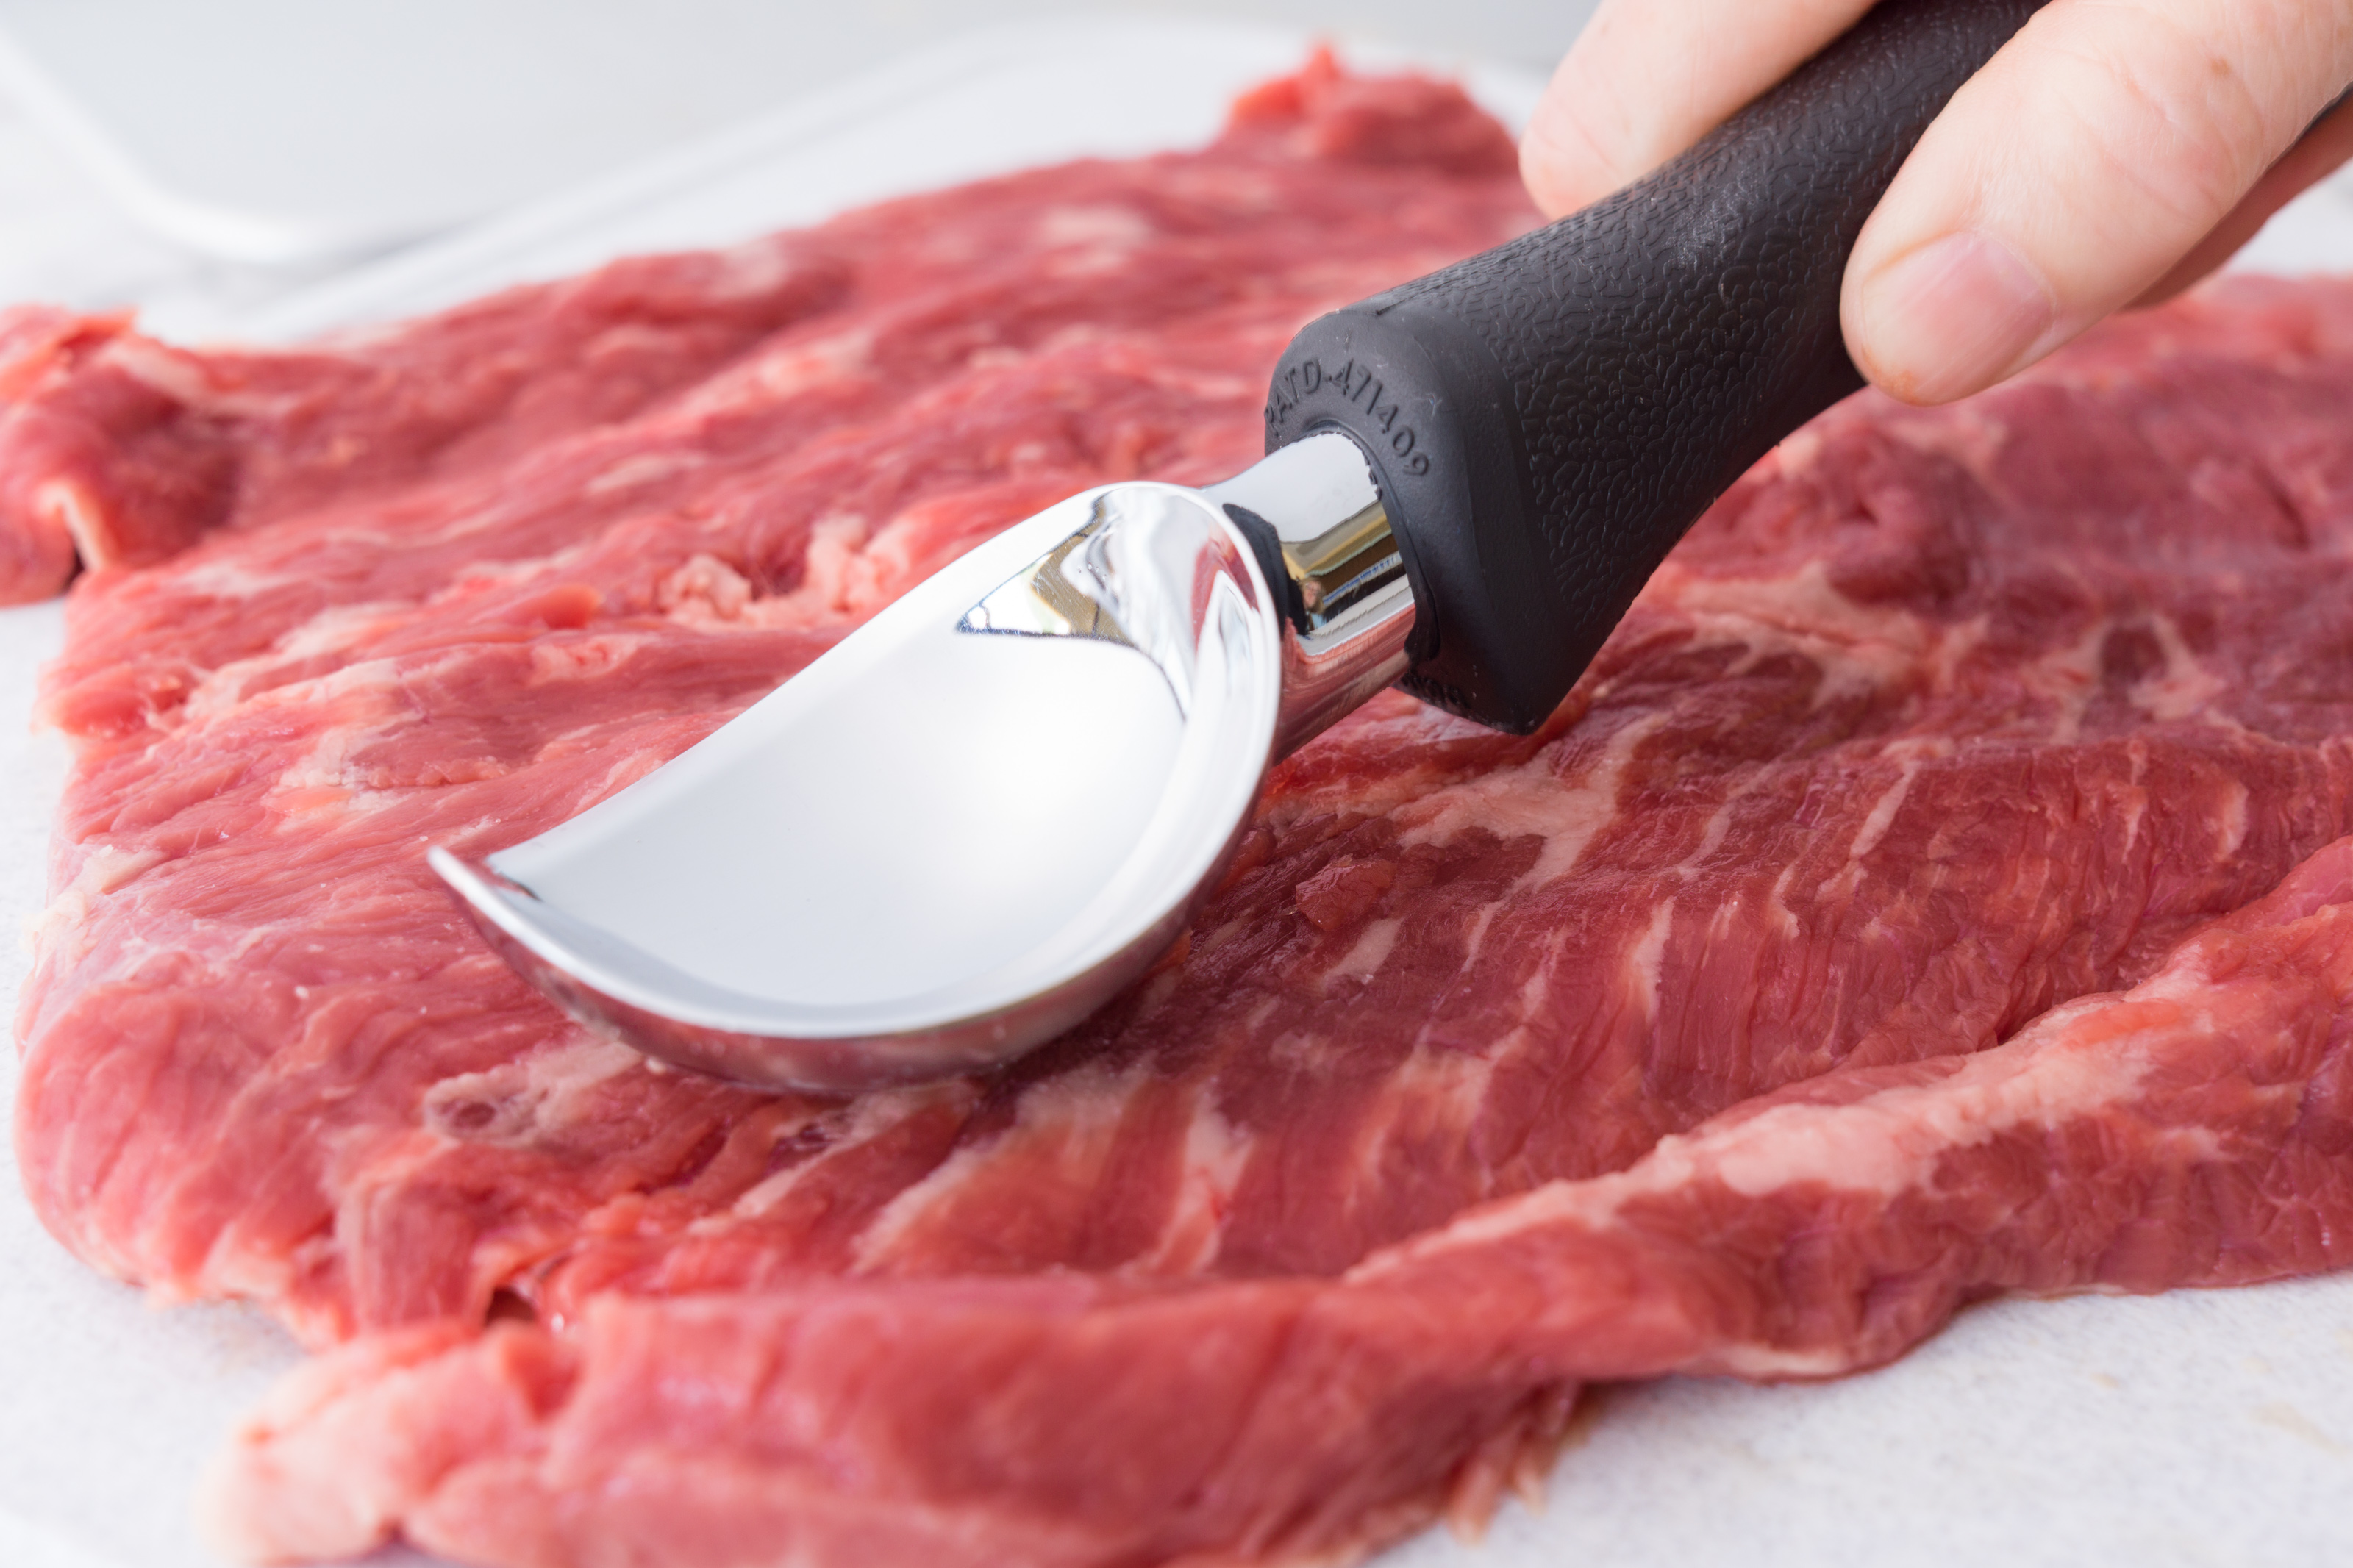 Using an Ice Cream Scoop to flatten the meat